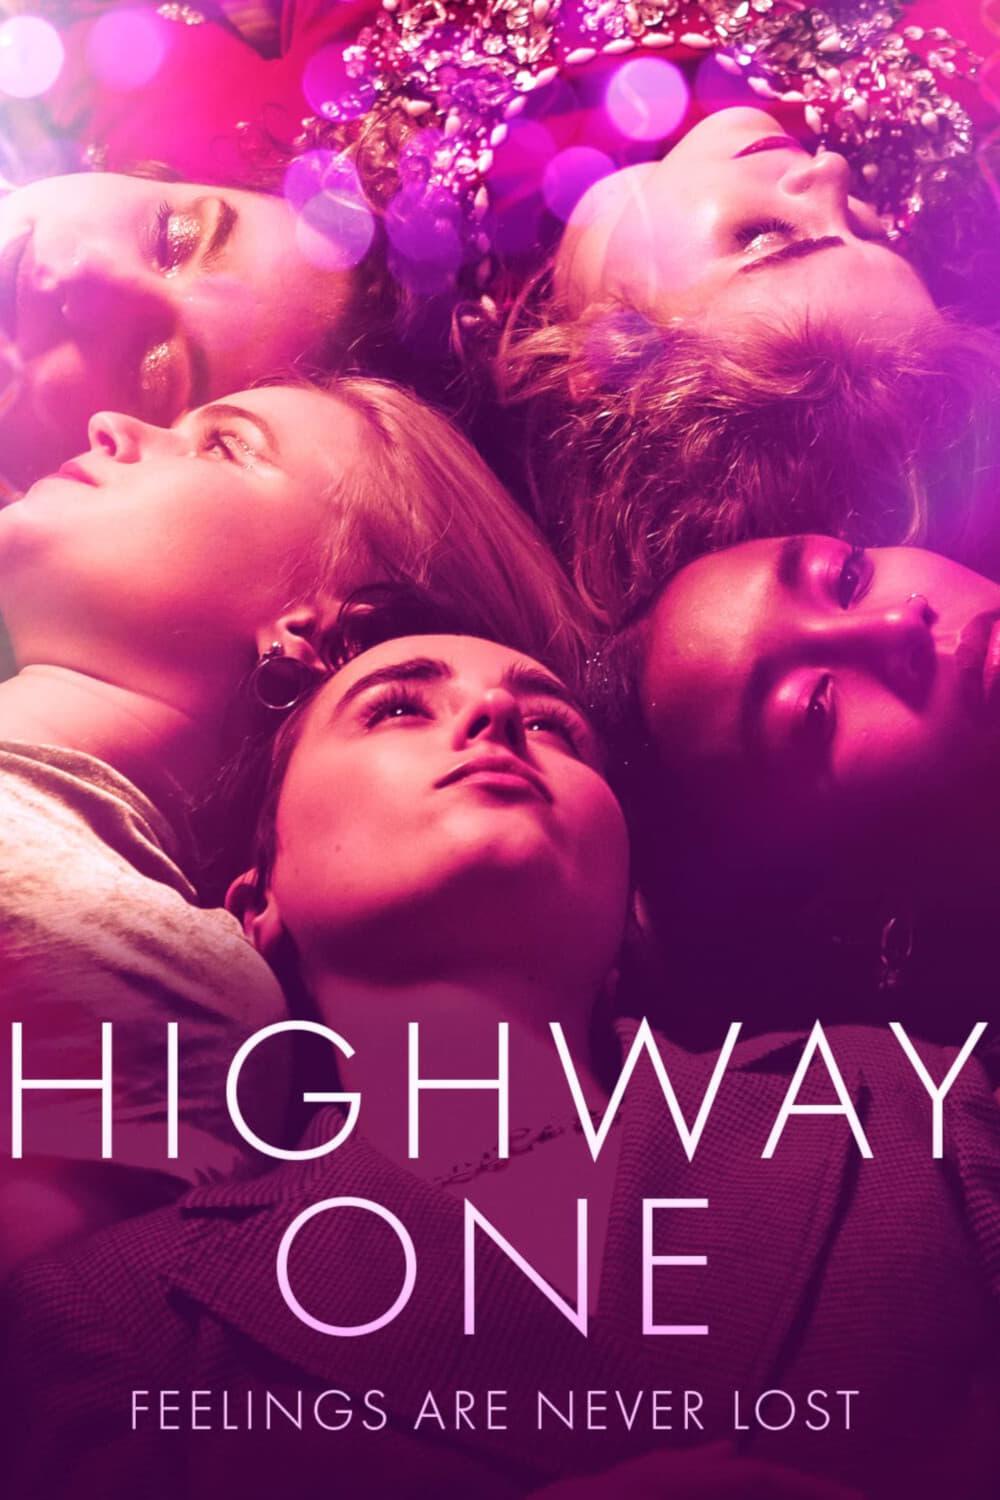 Highway One poster